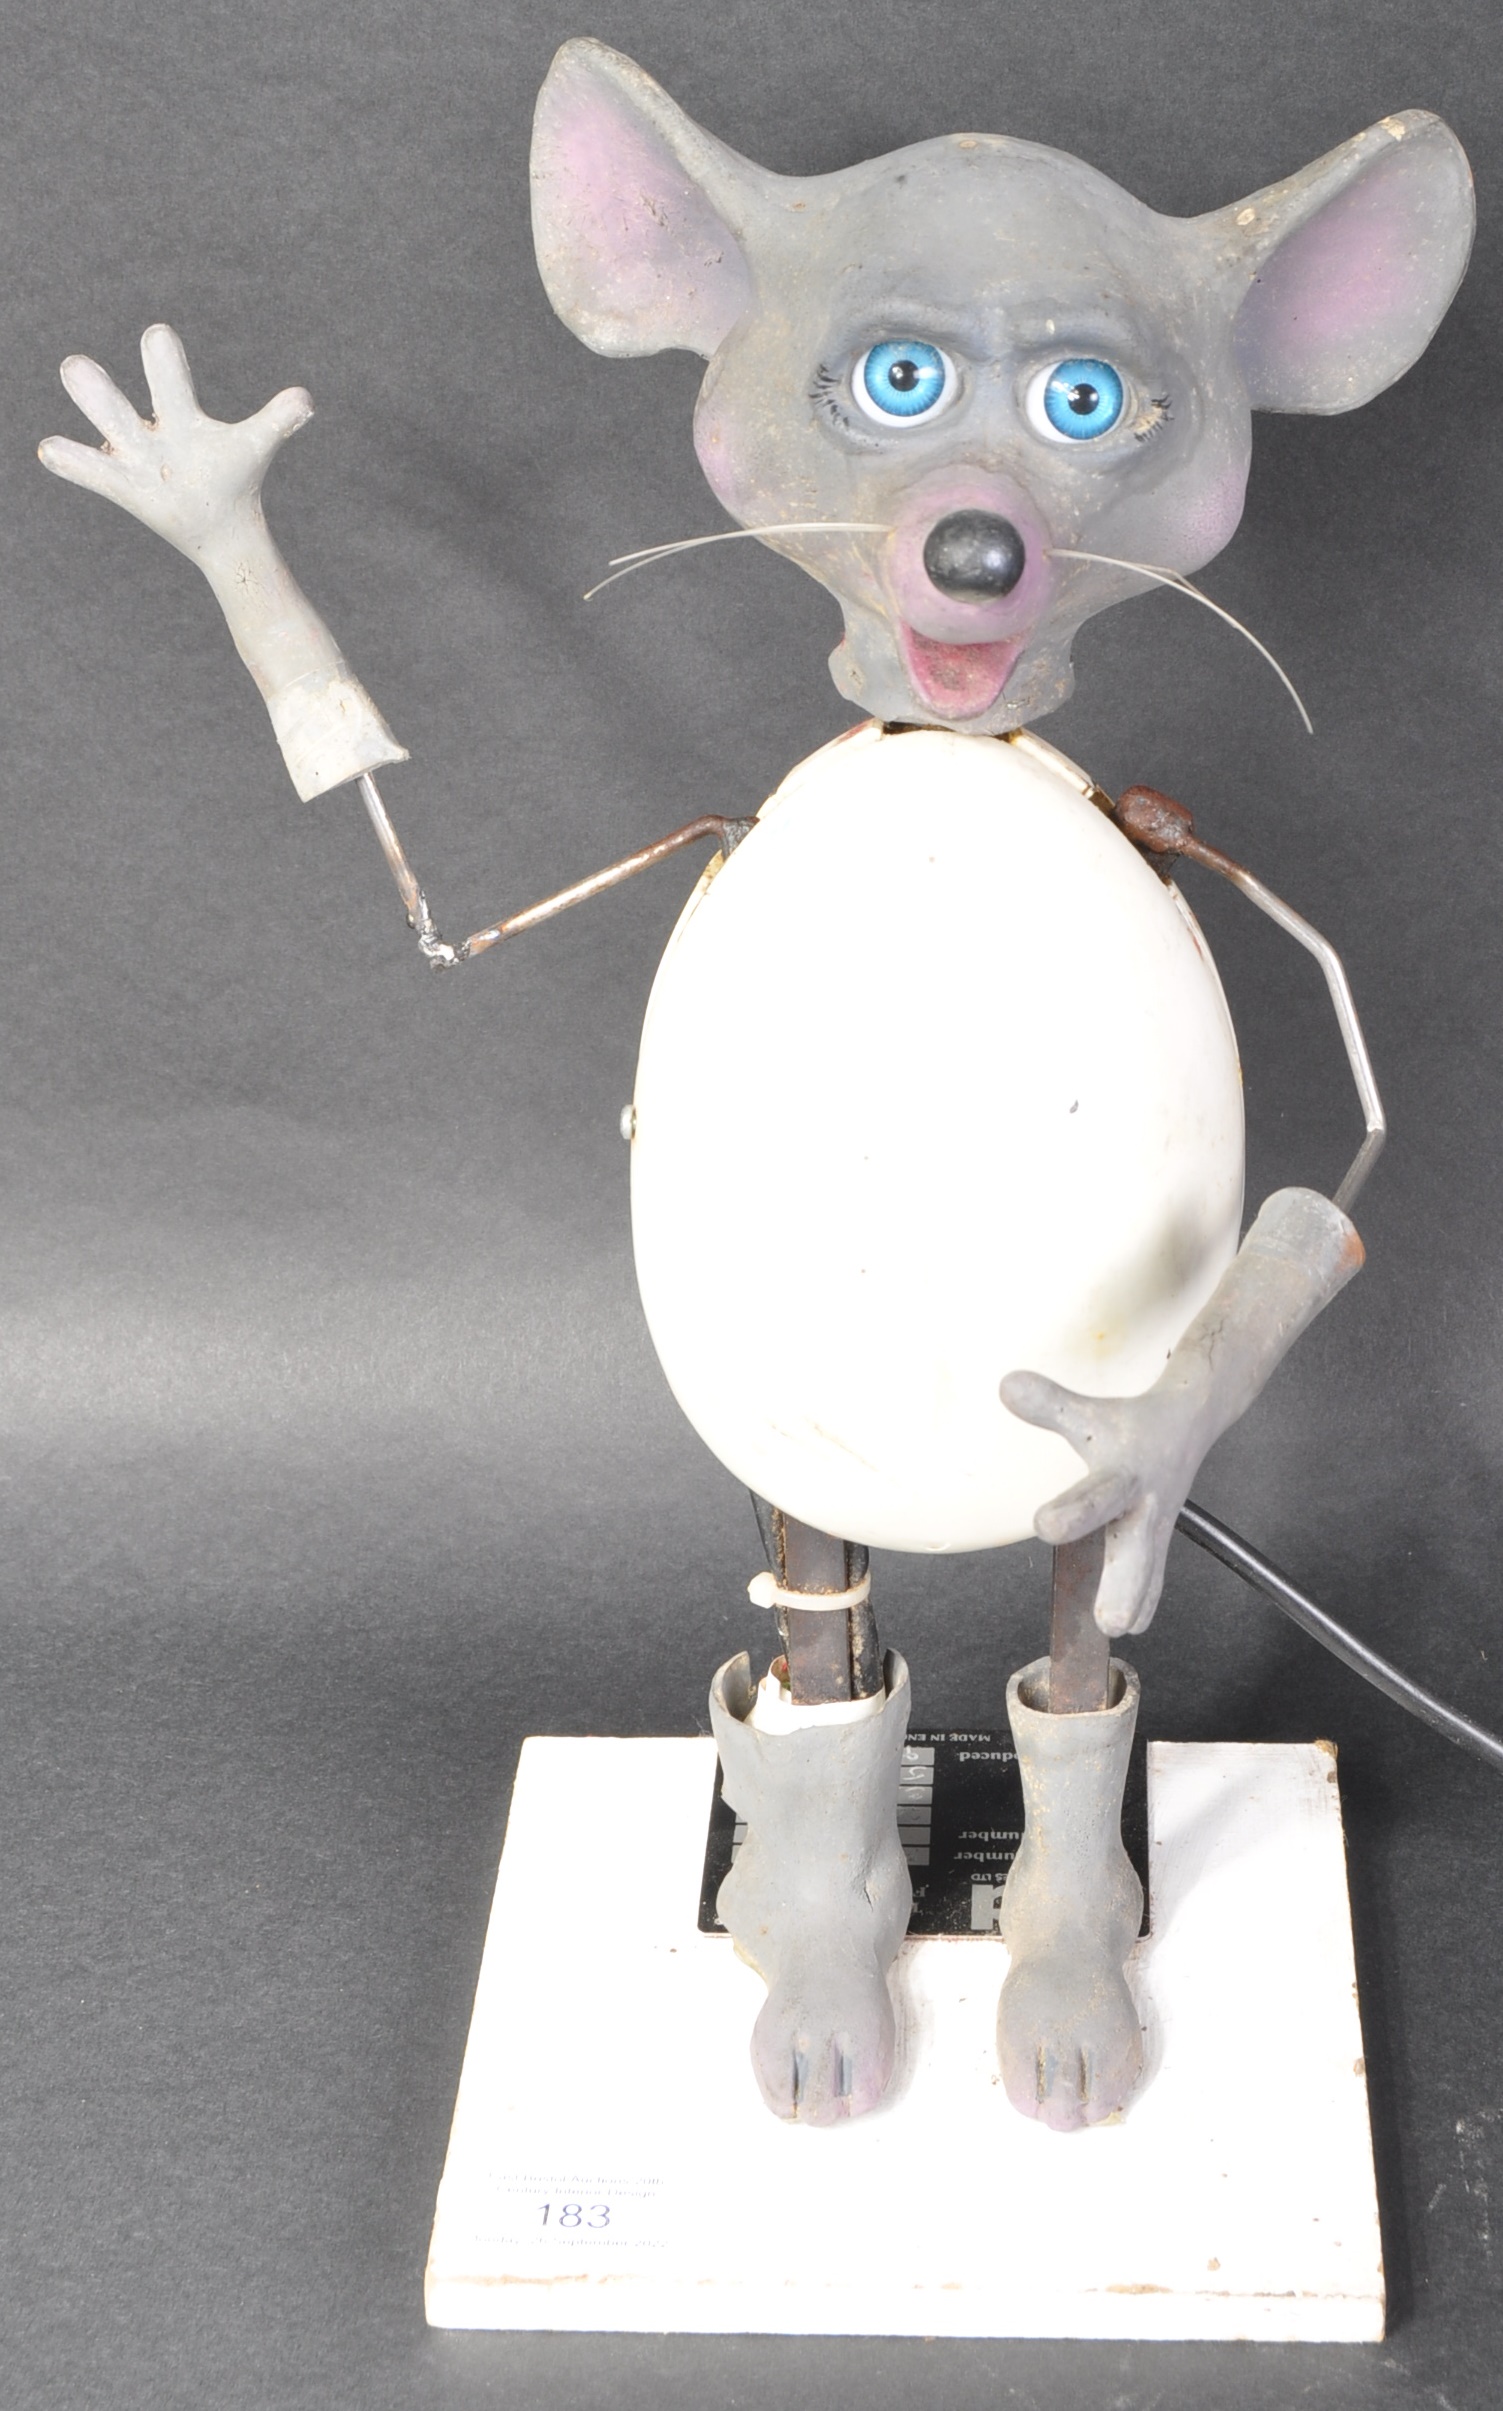 1990s SCRATCH BUILT ANIMATRONIC FIGURE OF A MOUSE - Image 2 of 7